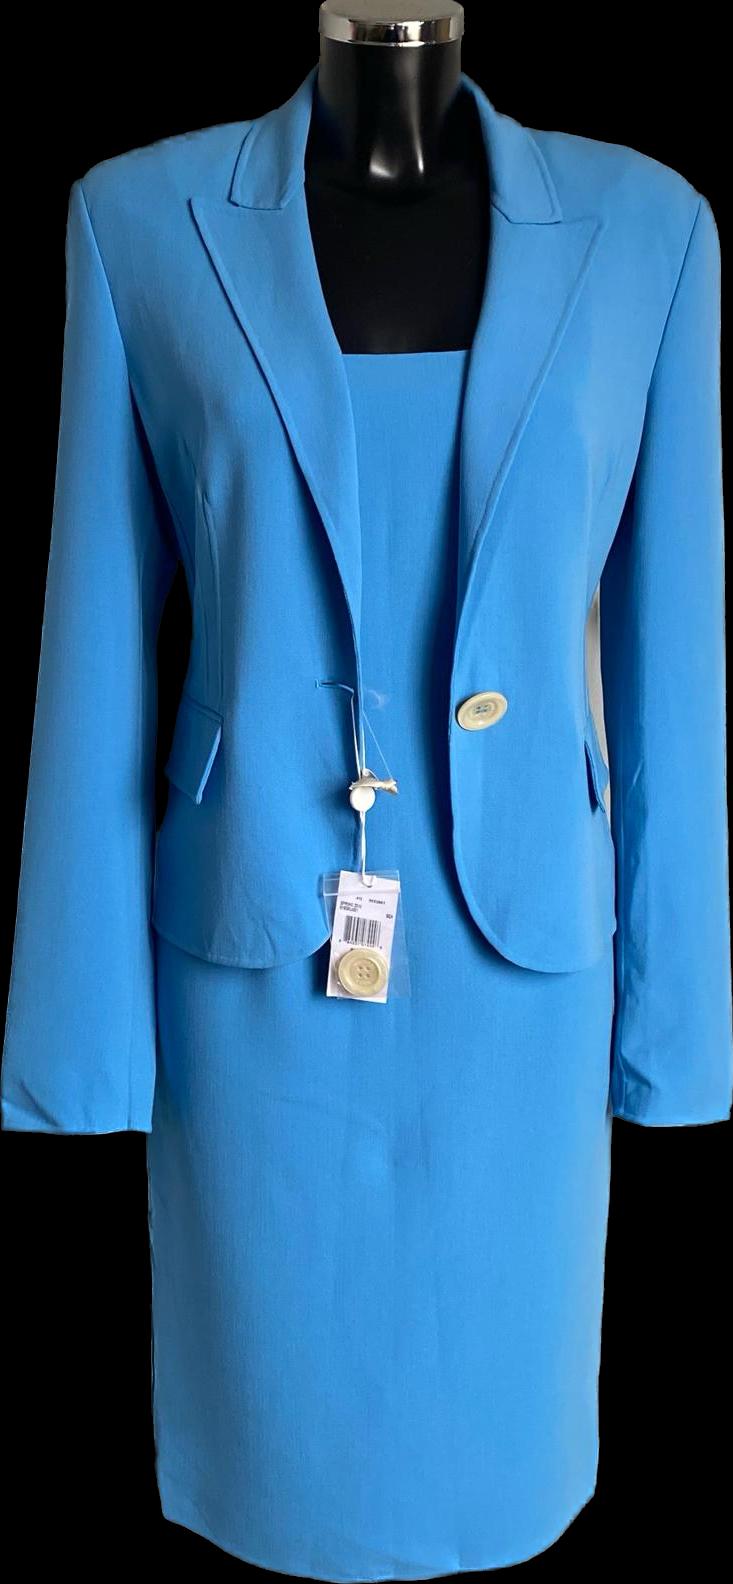 Michael Kors Royal Blue Dress Suit - size UK6 - NEW with Tags